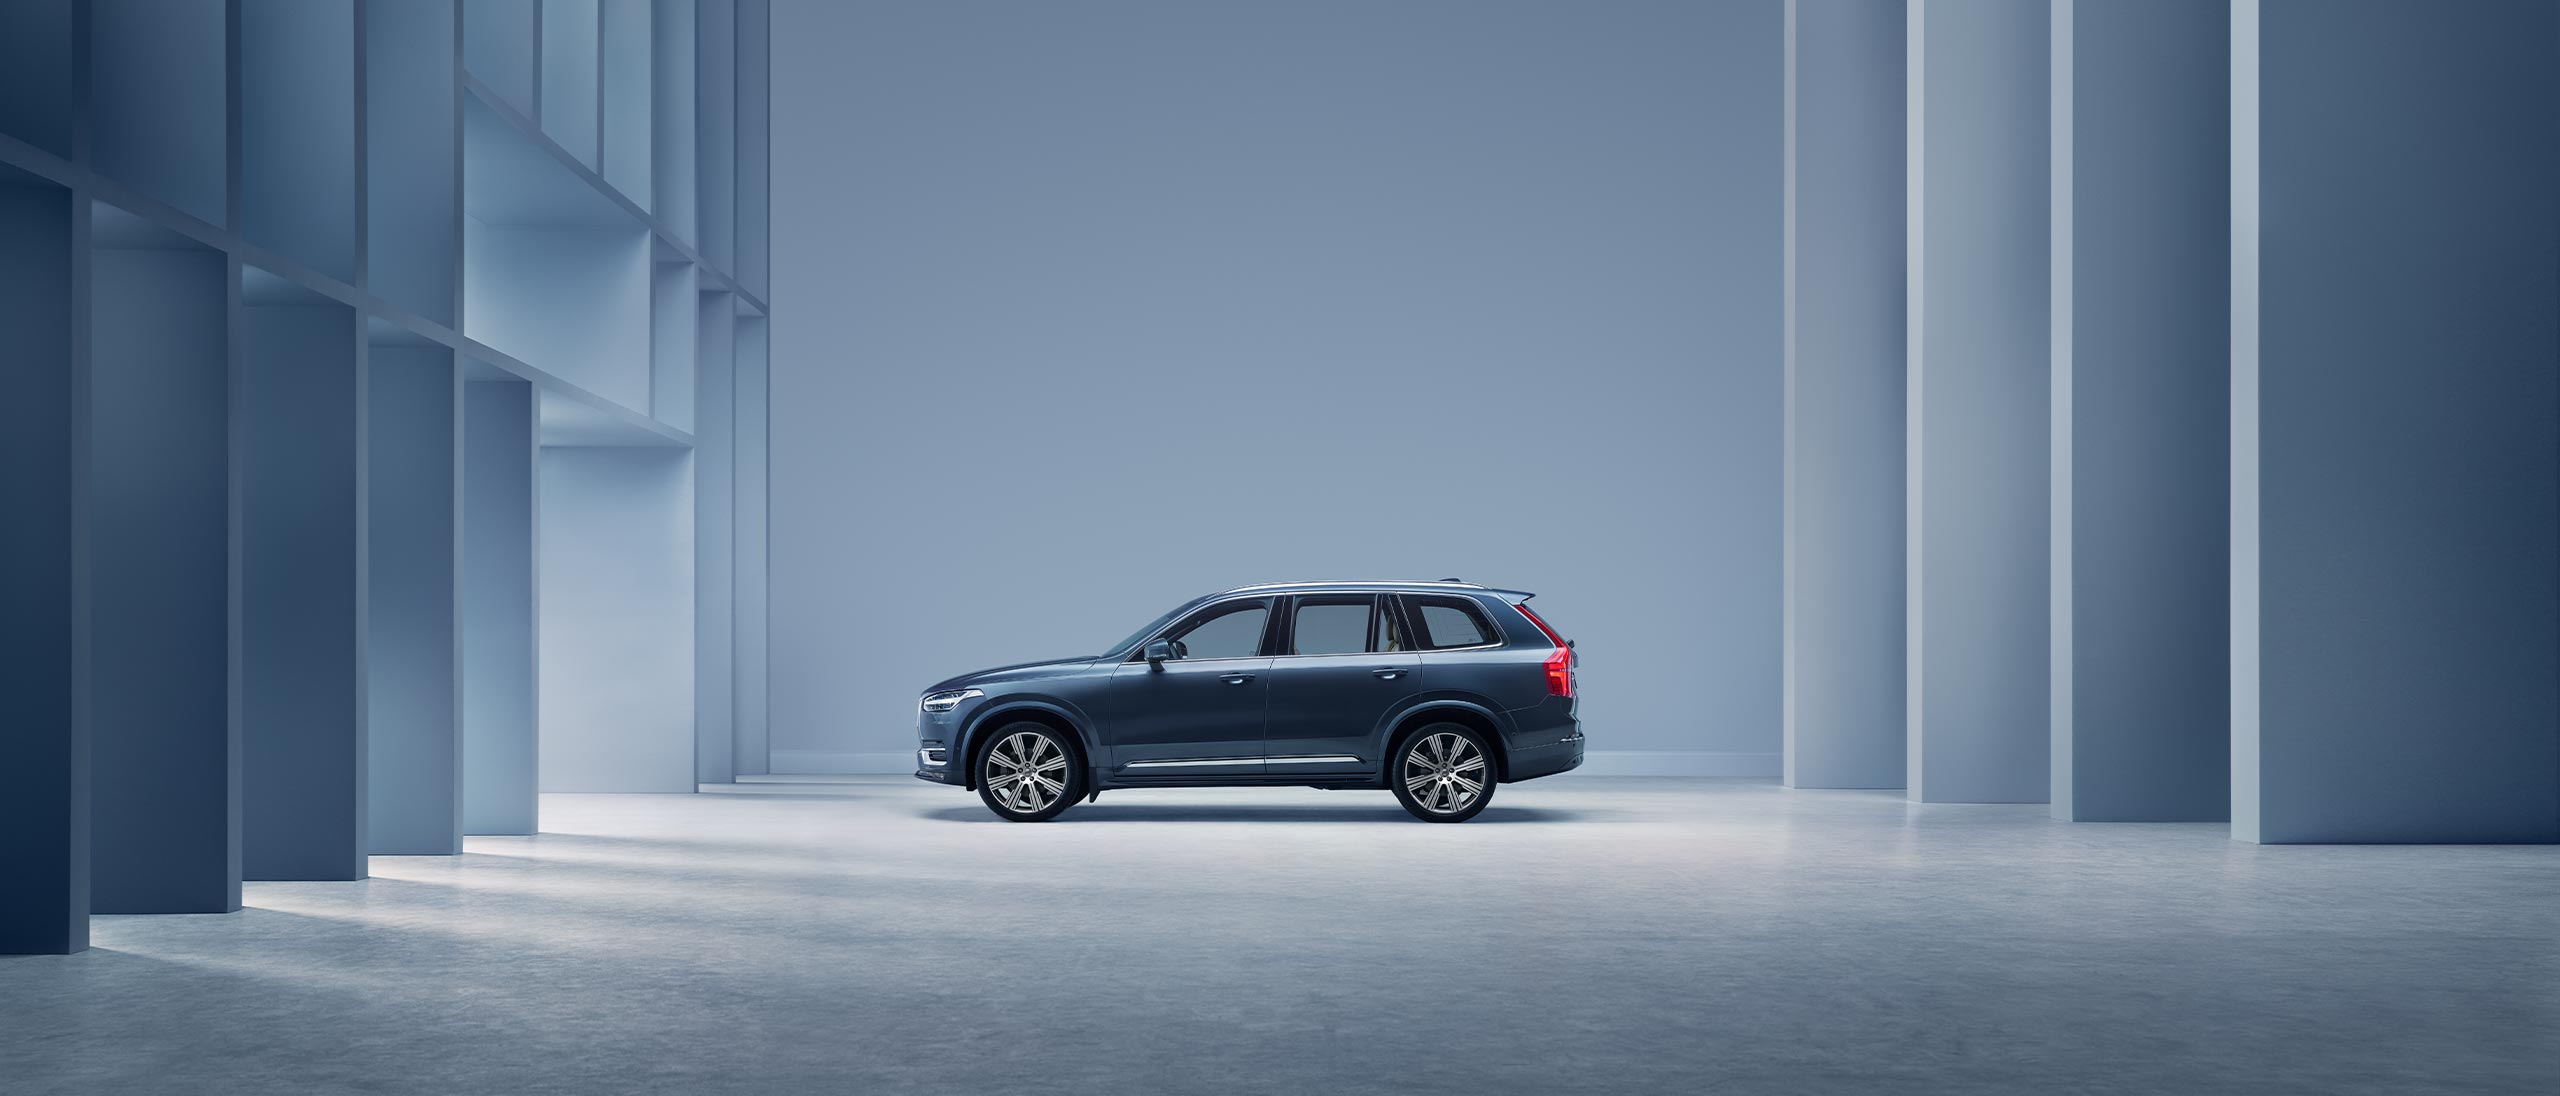 The side profile of a Volvo XC90 SUV.